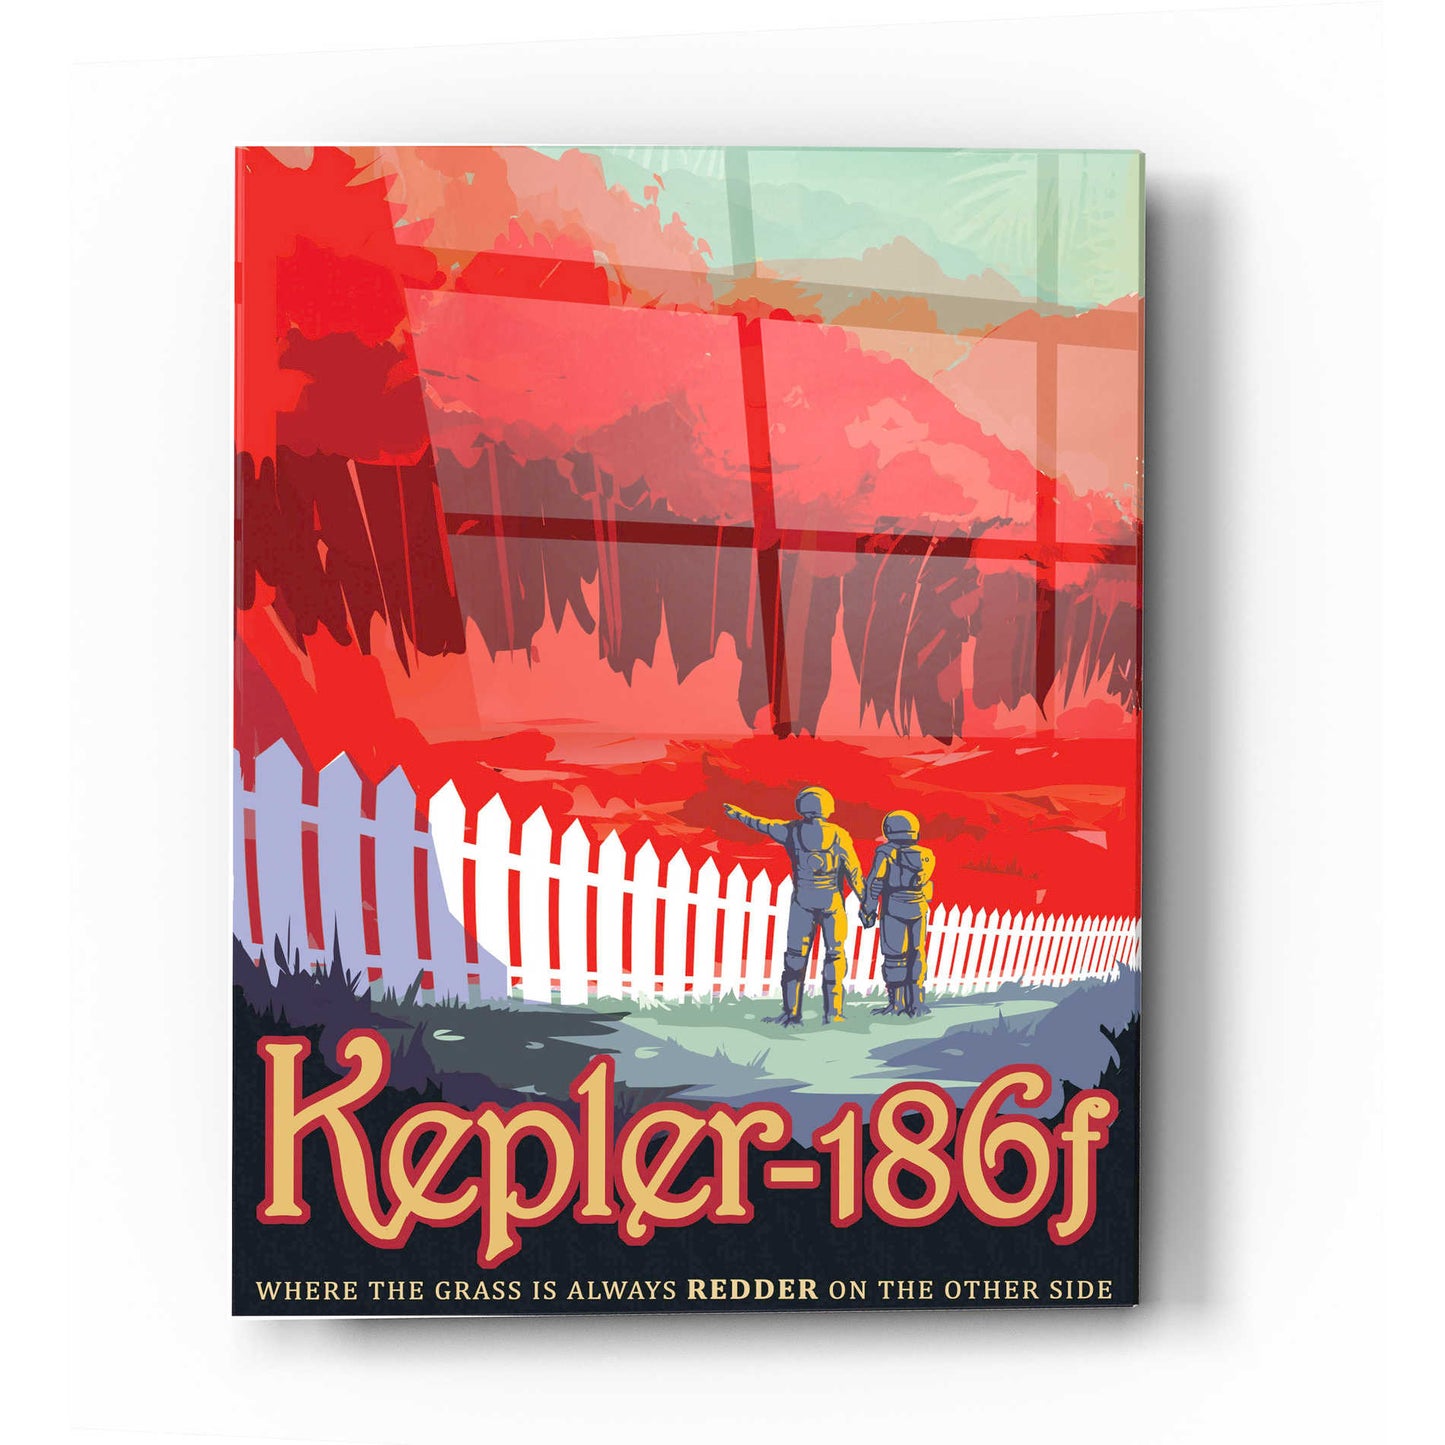 Epic Art 'Visions of the Future: Kepler-186f' Acrylic Glass Wall Art,24x36